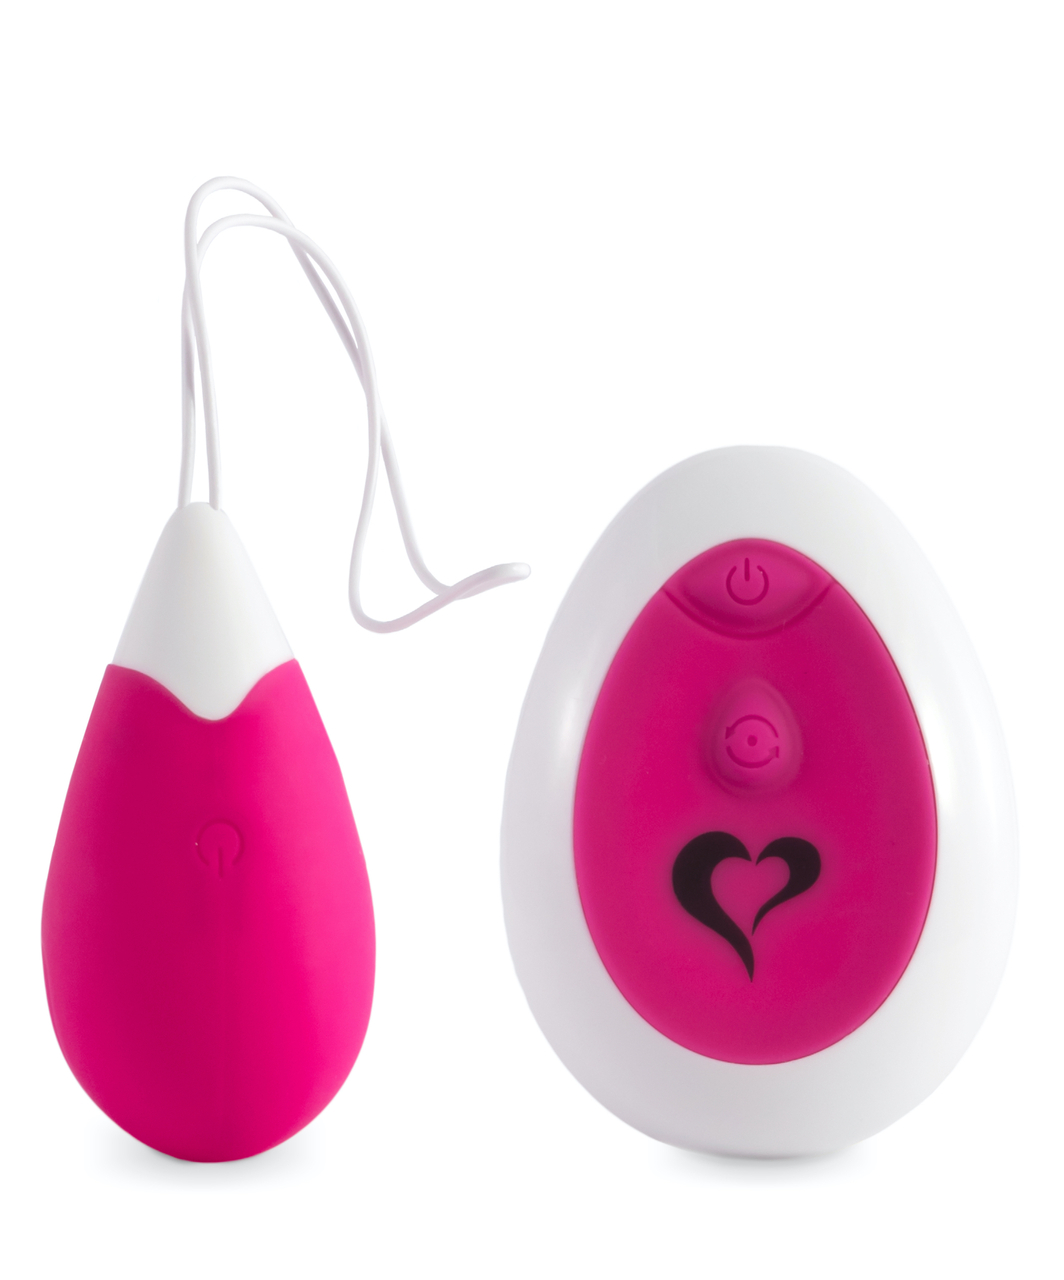 FeelzToys Anna Rechargeable Egg with Remote Control